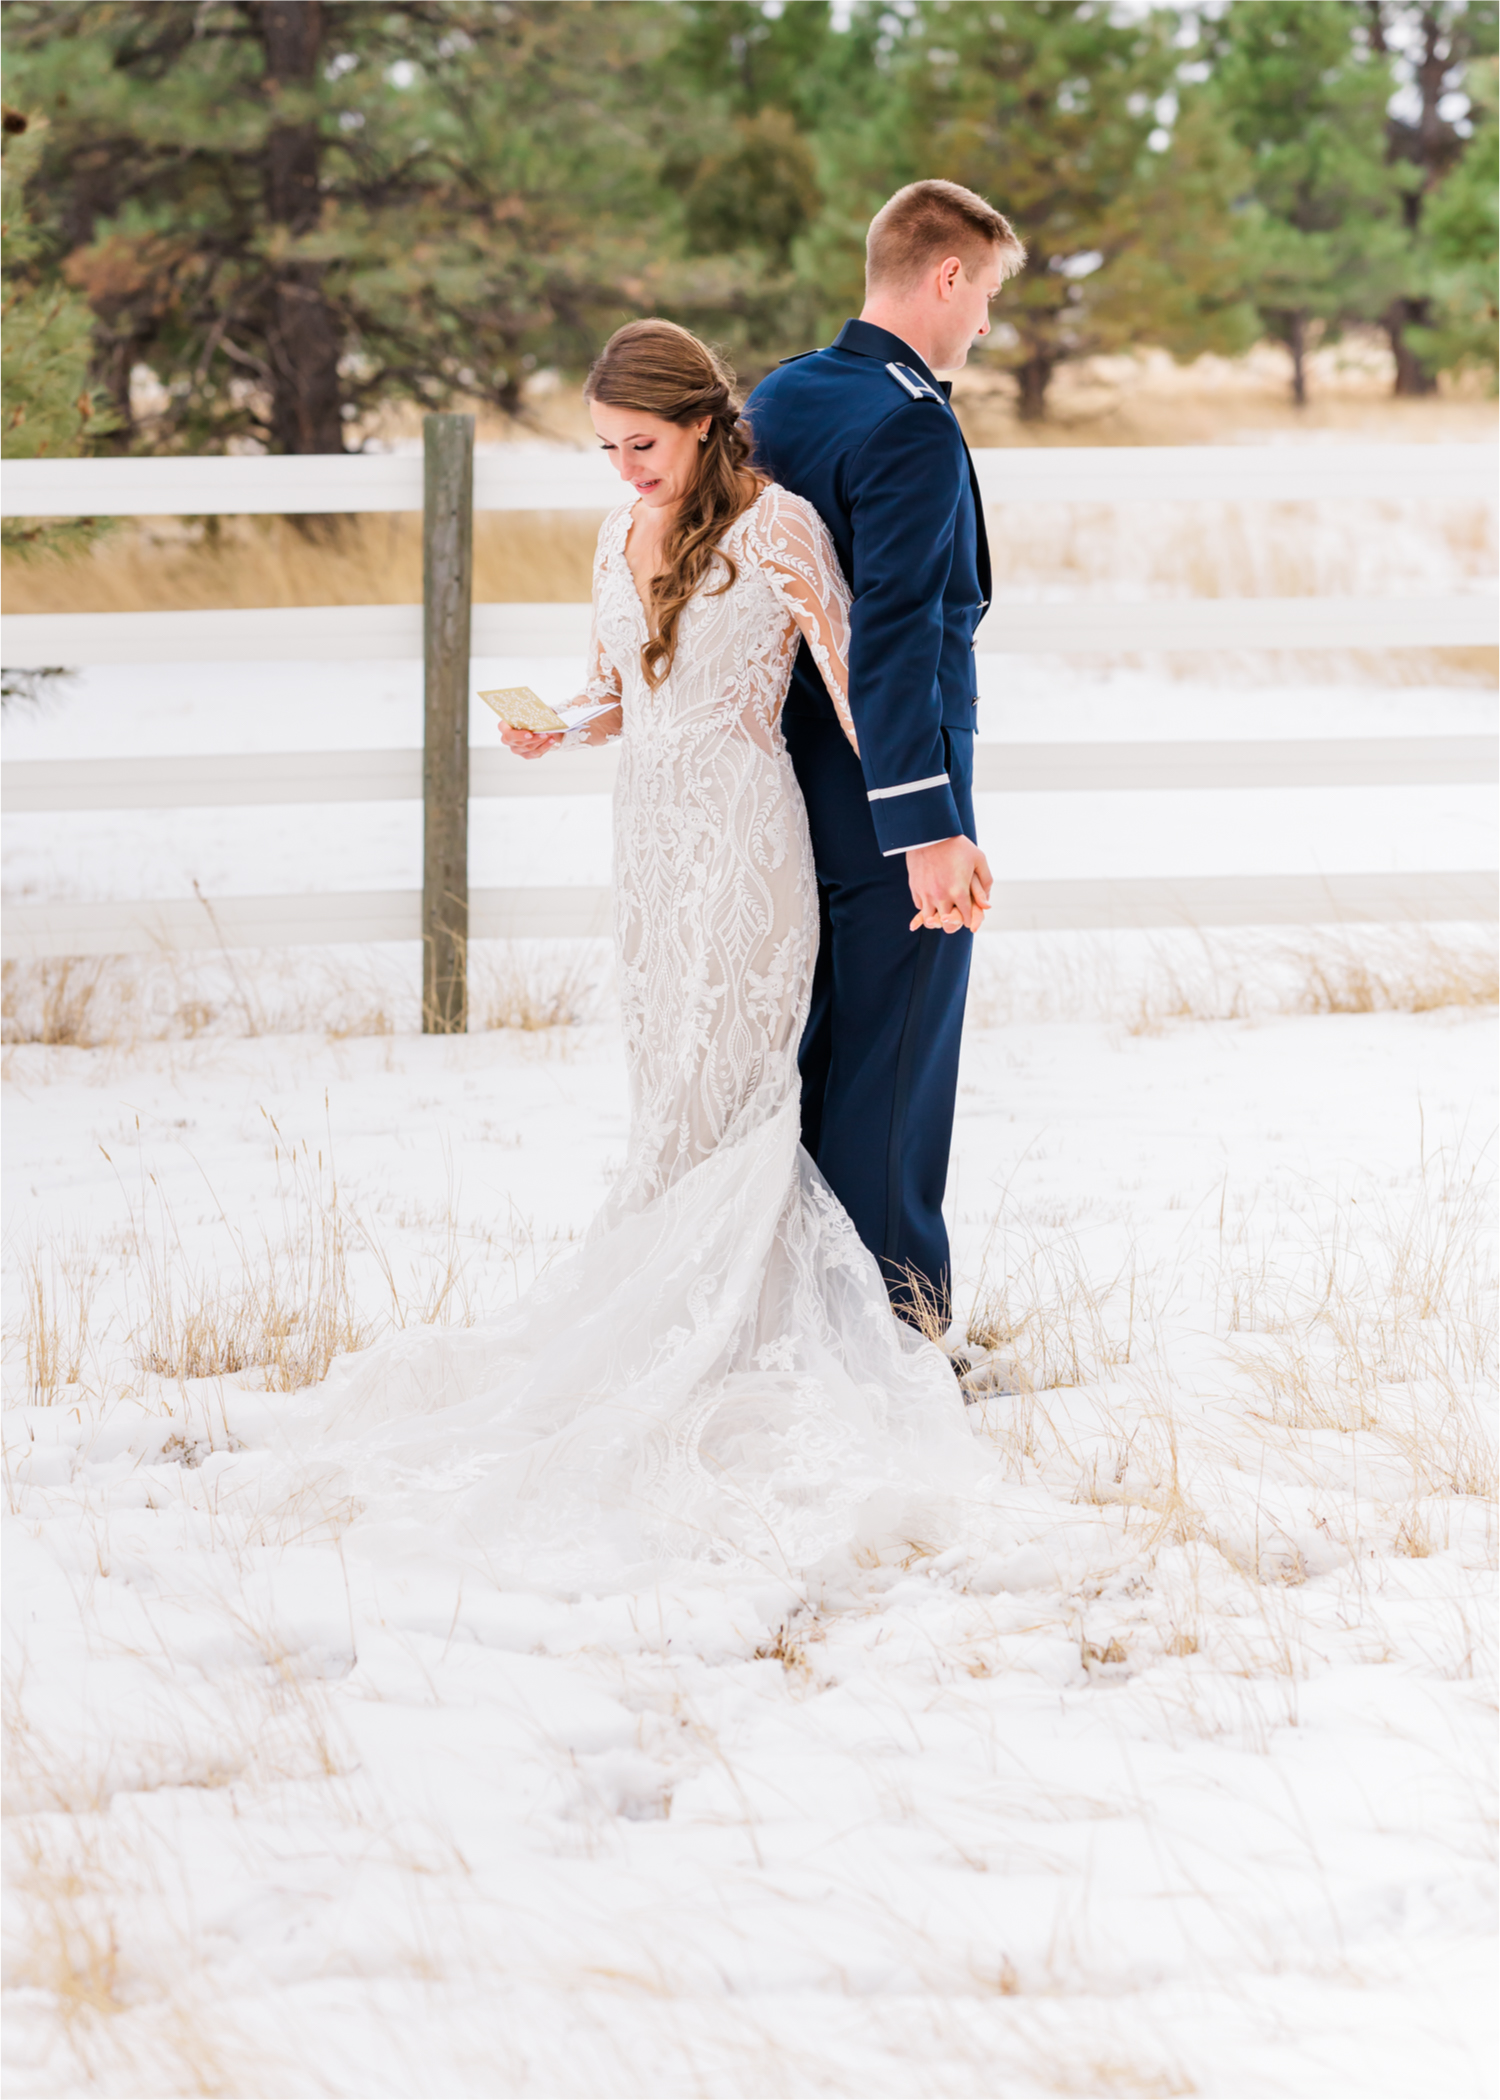 Winter Wonderland Wedding in Colorado Springs | Britni Girard Photography Colorado Wedding Photography and Film Team | Snow covered mountains and Christmas just a few days away | Annika + John's Nostalgic Winter Wedding | Bride's Dress iDream Bridal Essence of Australia | Air Force Academy | First Look in Snow and Bride and Groom Letters back to back